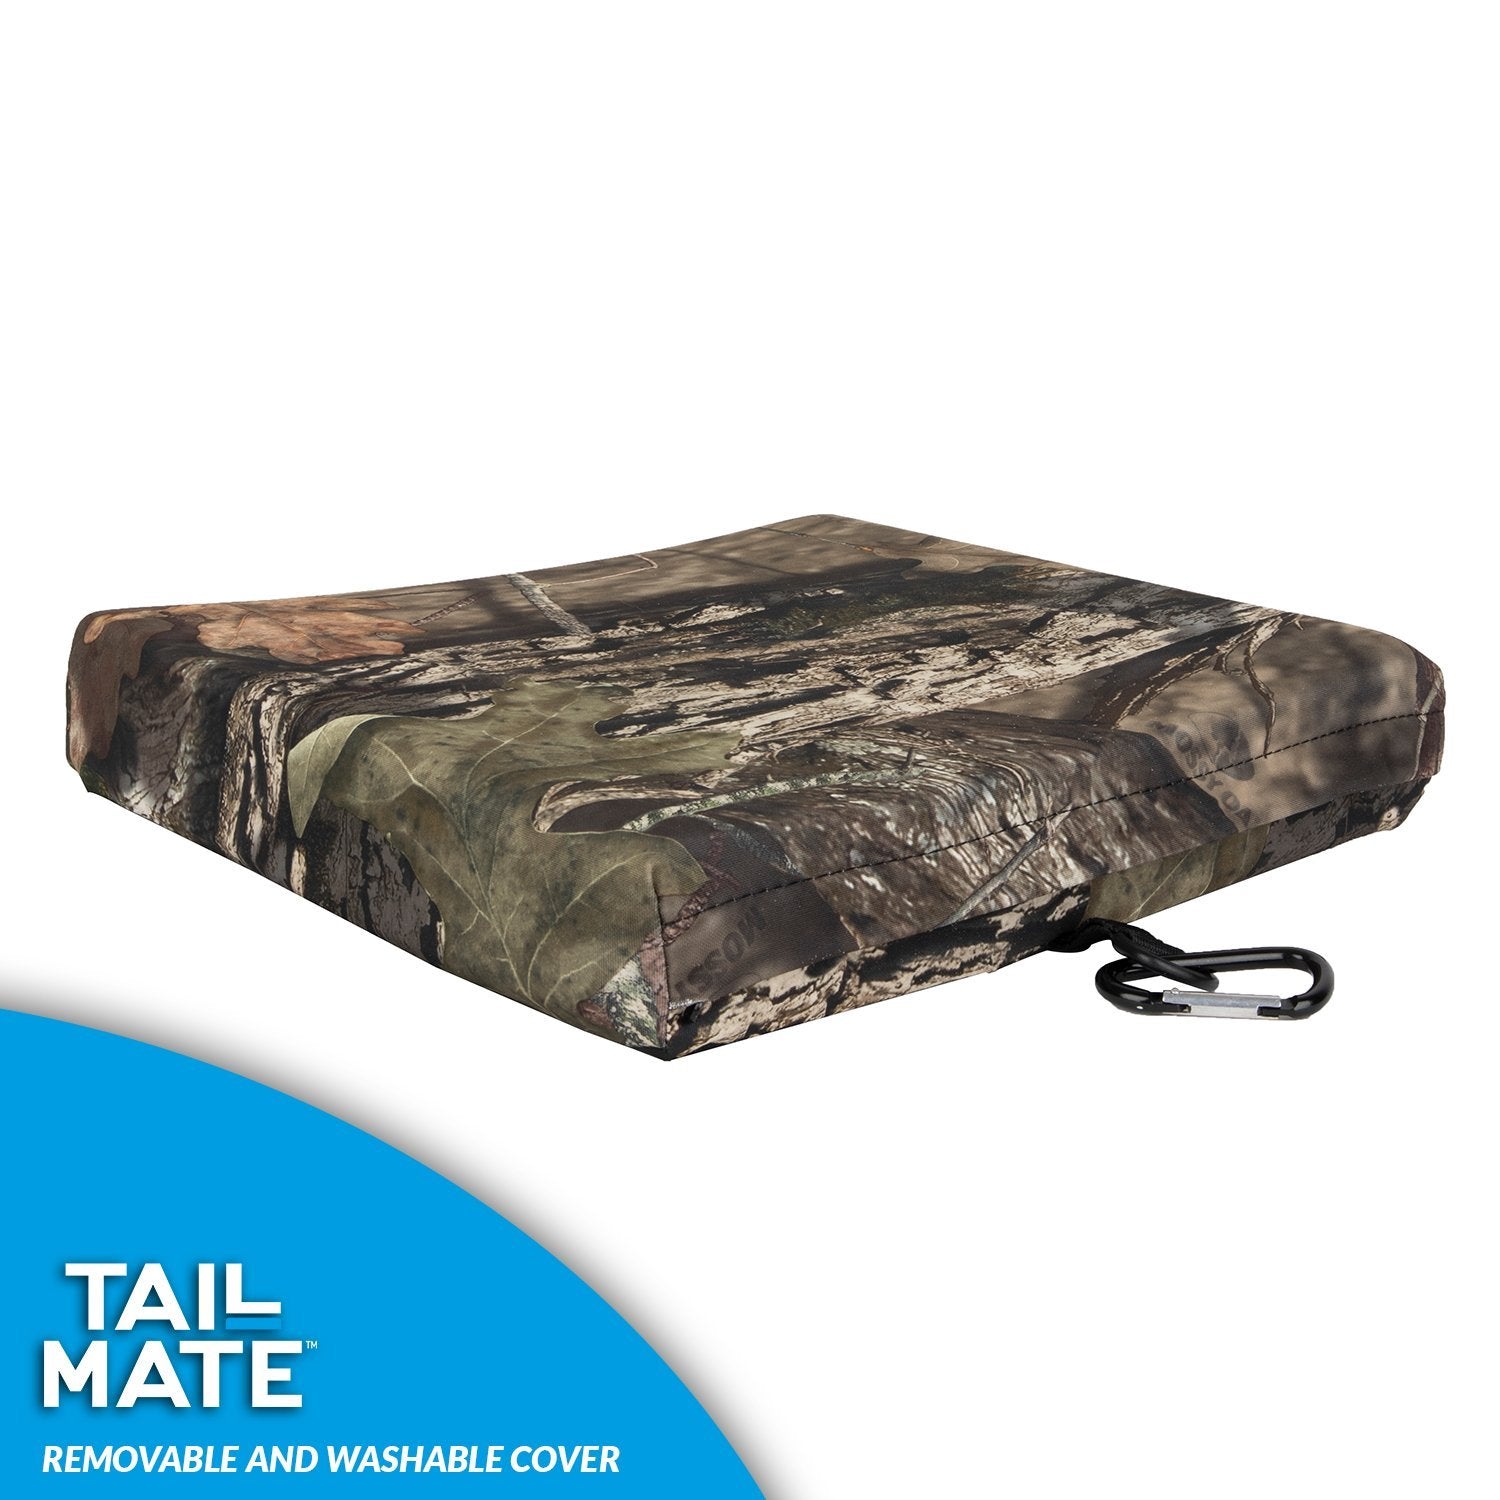 Tail Mate GelCore Outdoor Seat Cushion for Hunting and Fishing, Mossy Oak  Break Up Country